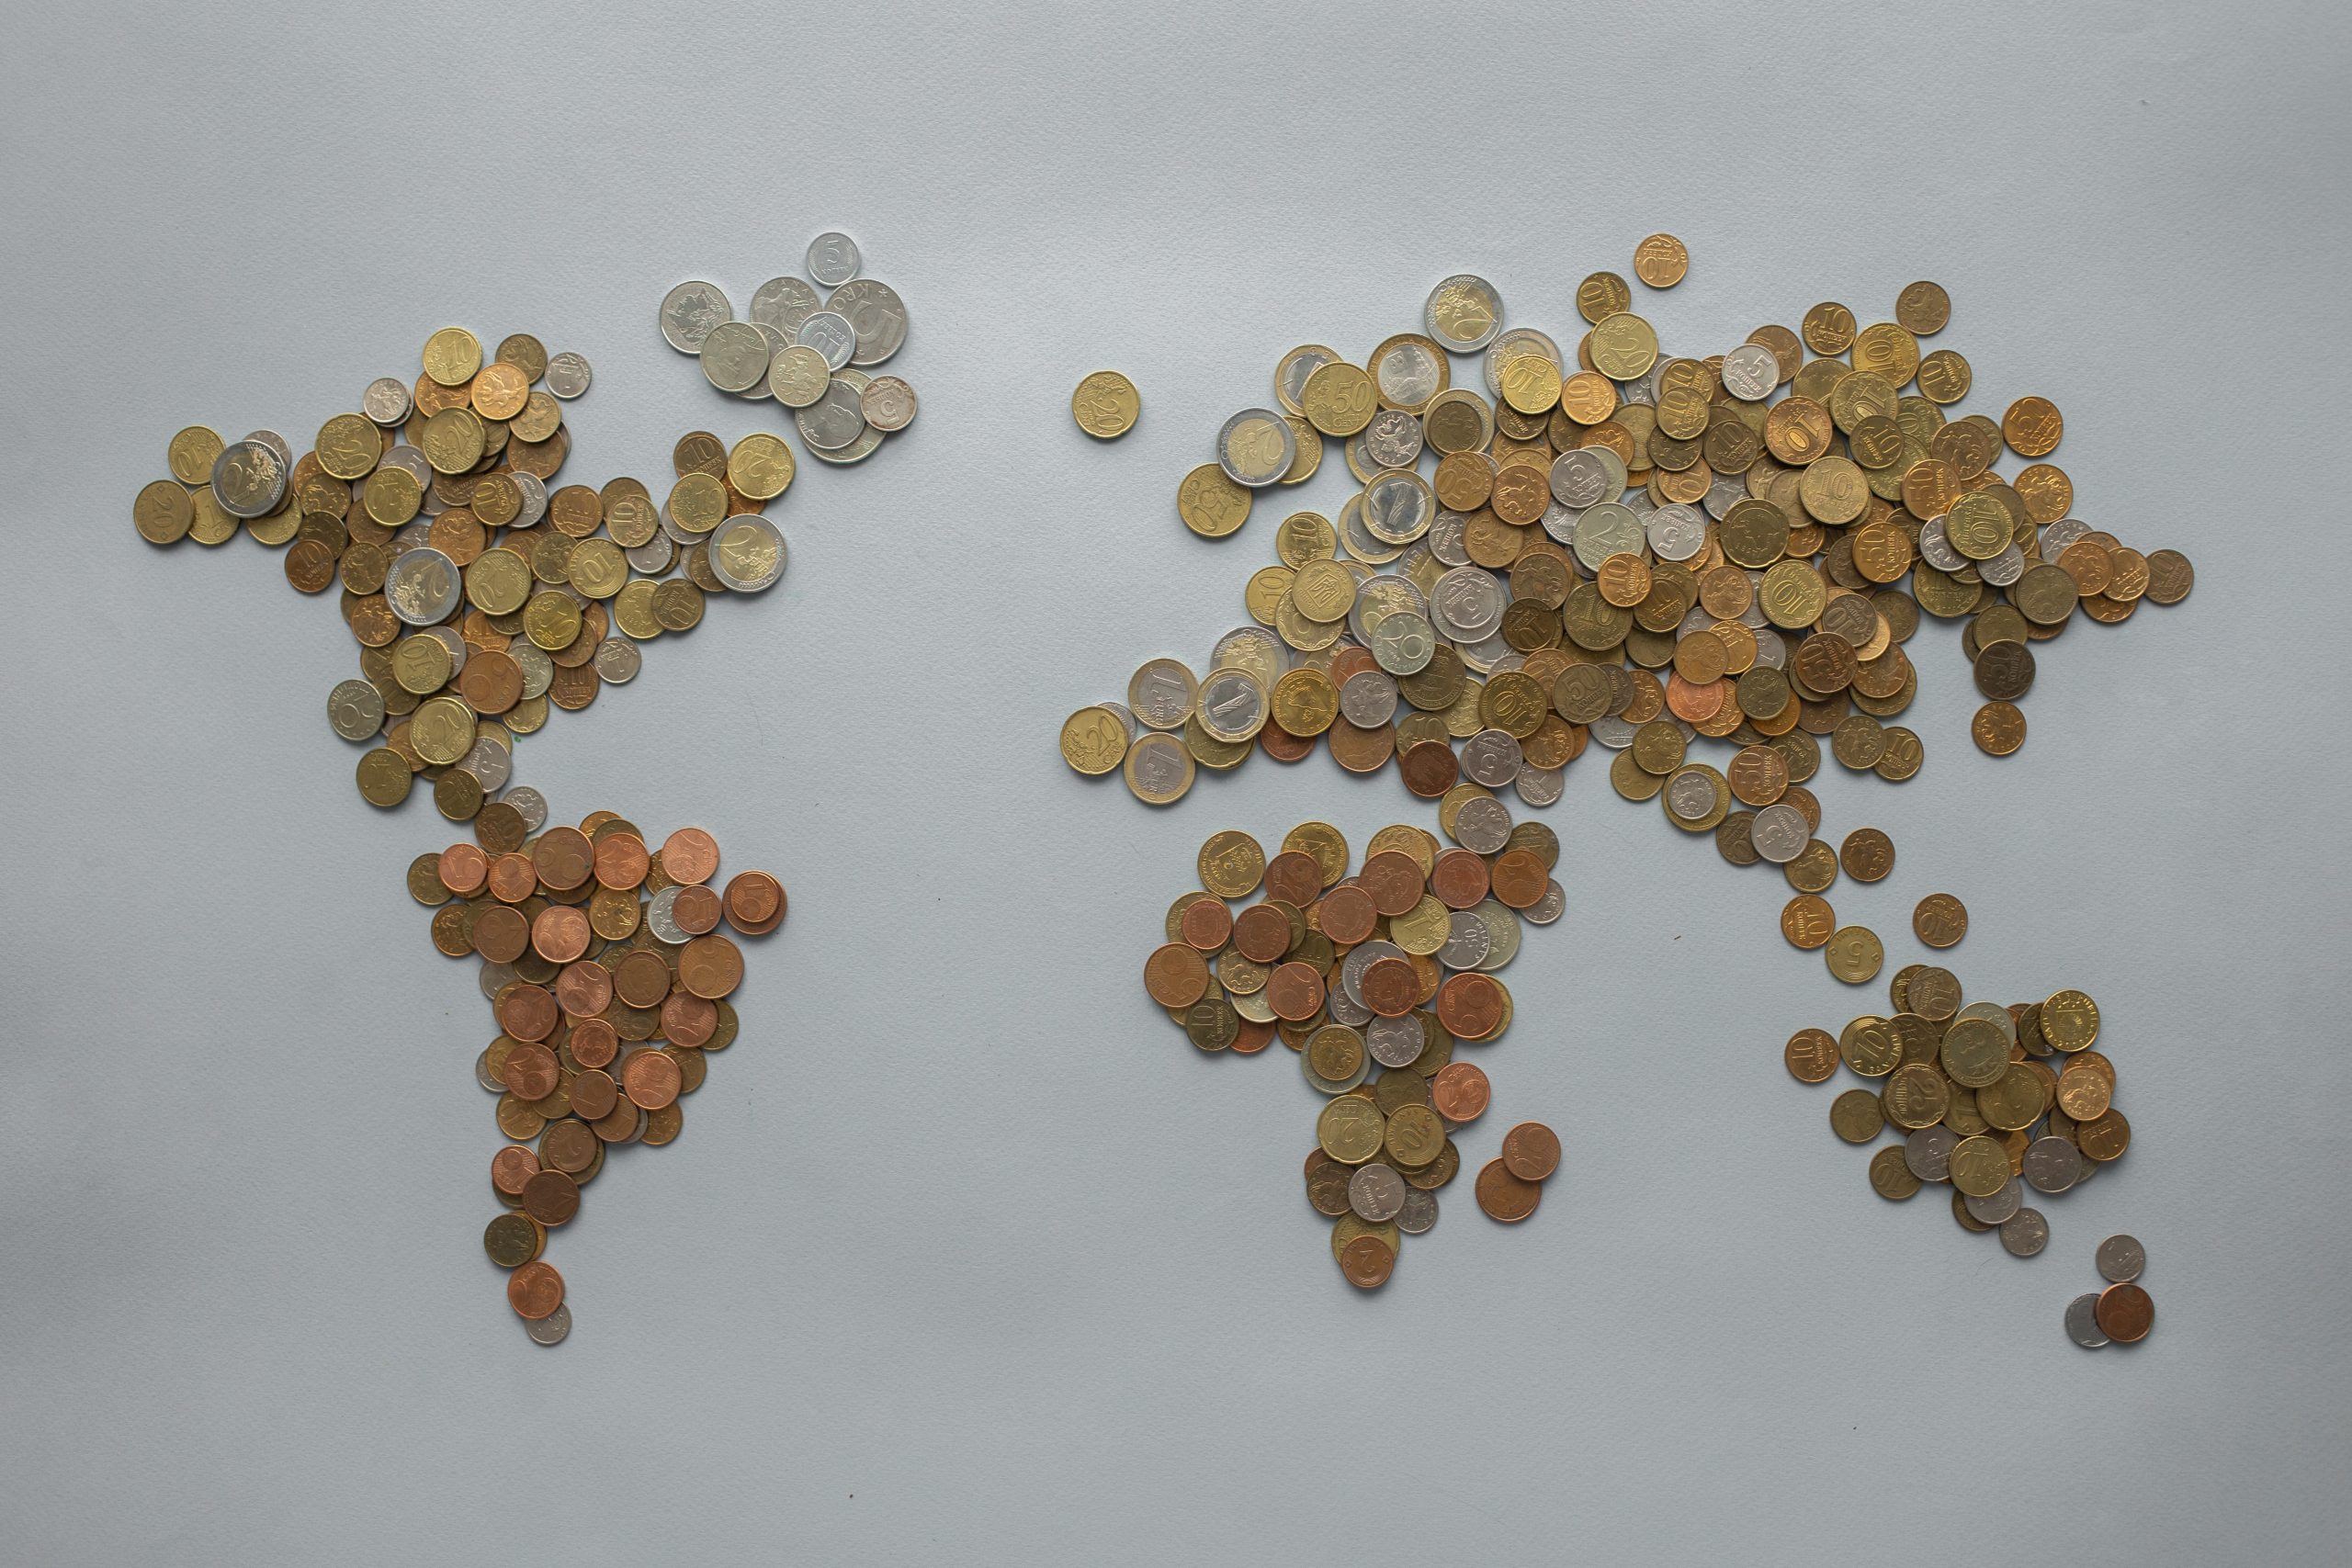 Coins assembled in the shapes of the continents of the world